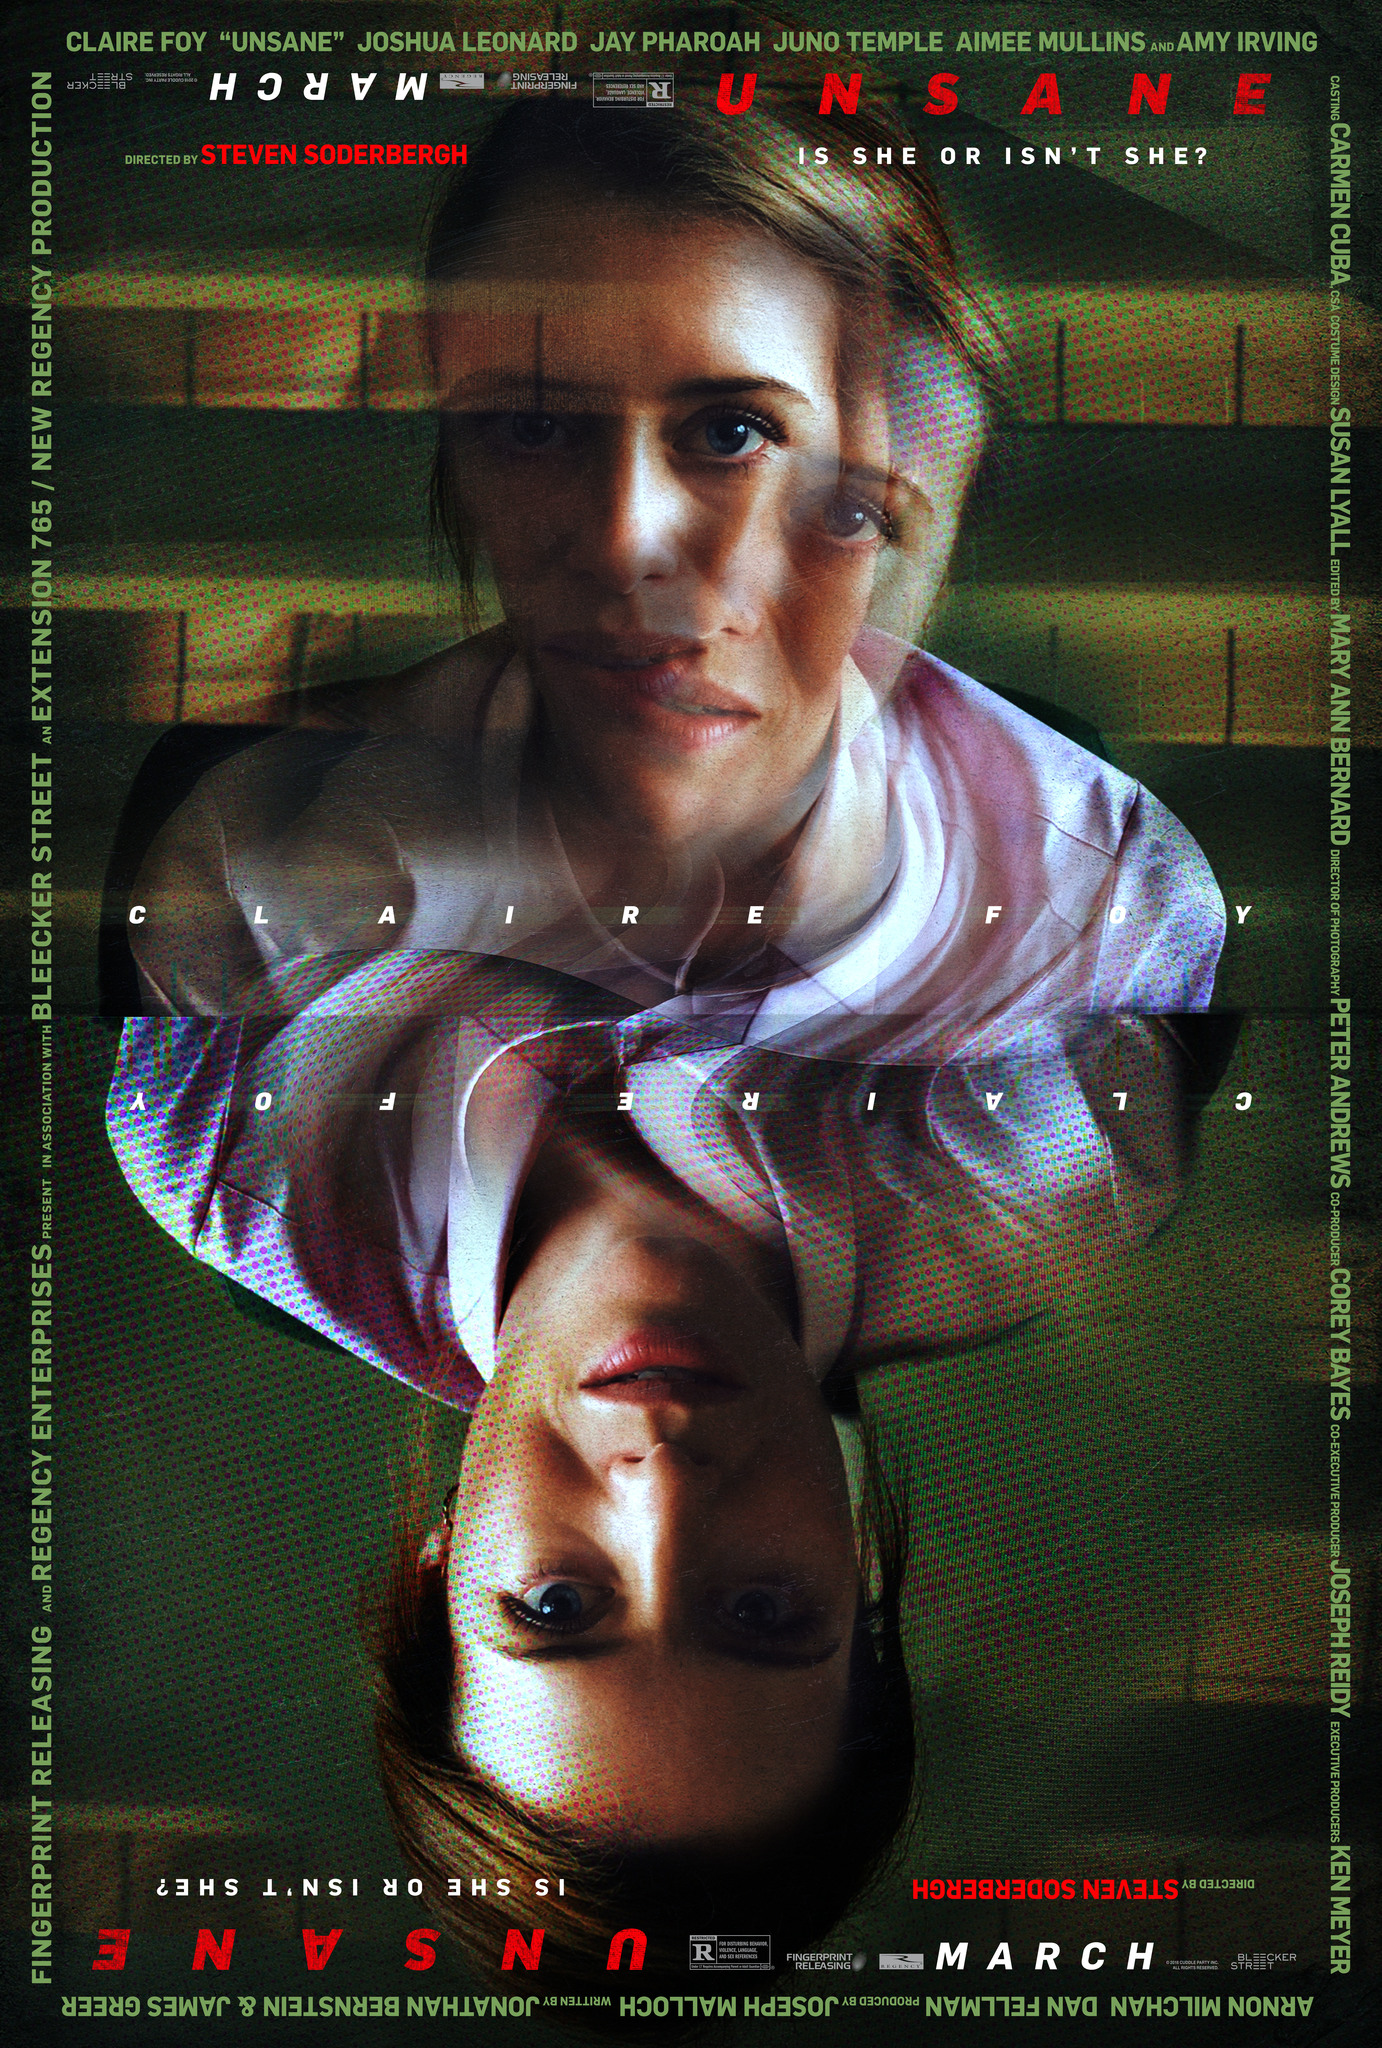 Unsane (2018) จิตหลอน Claire Foy